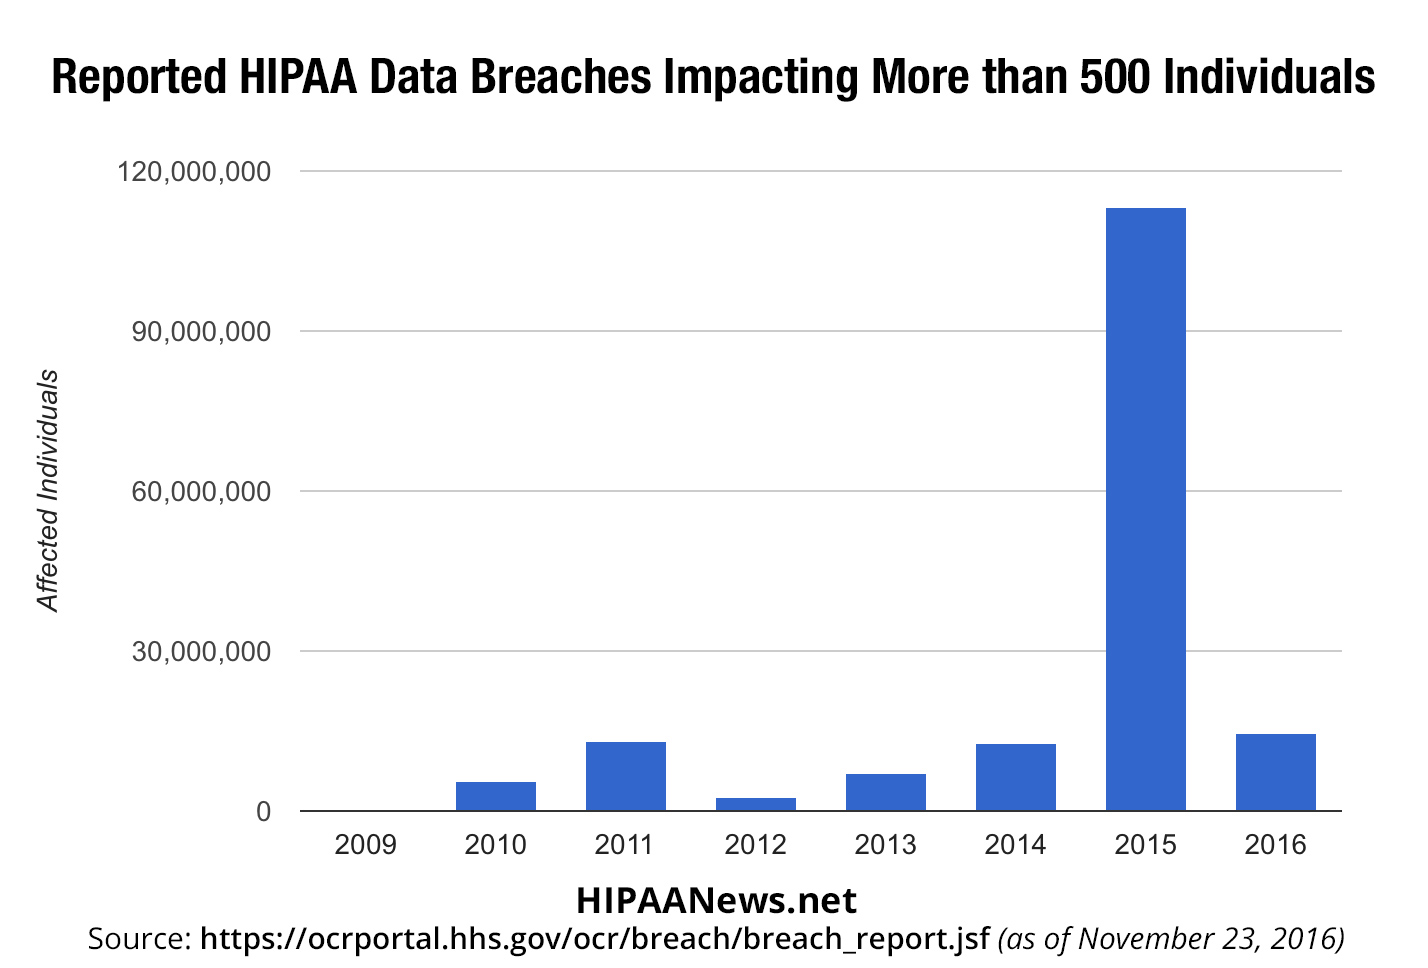 Reported HIPAA Data Breaches Since 2009